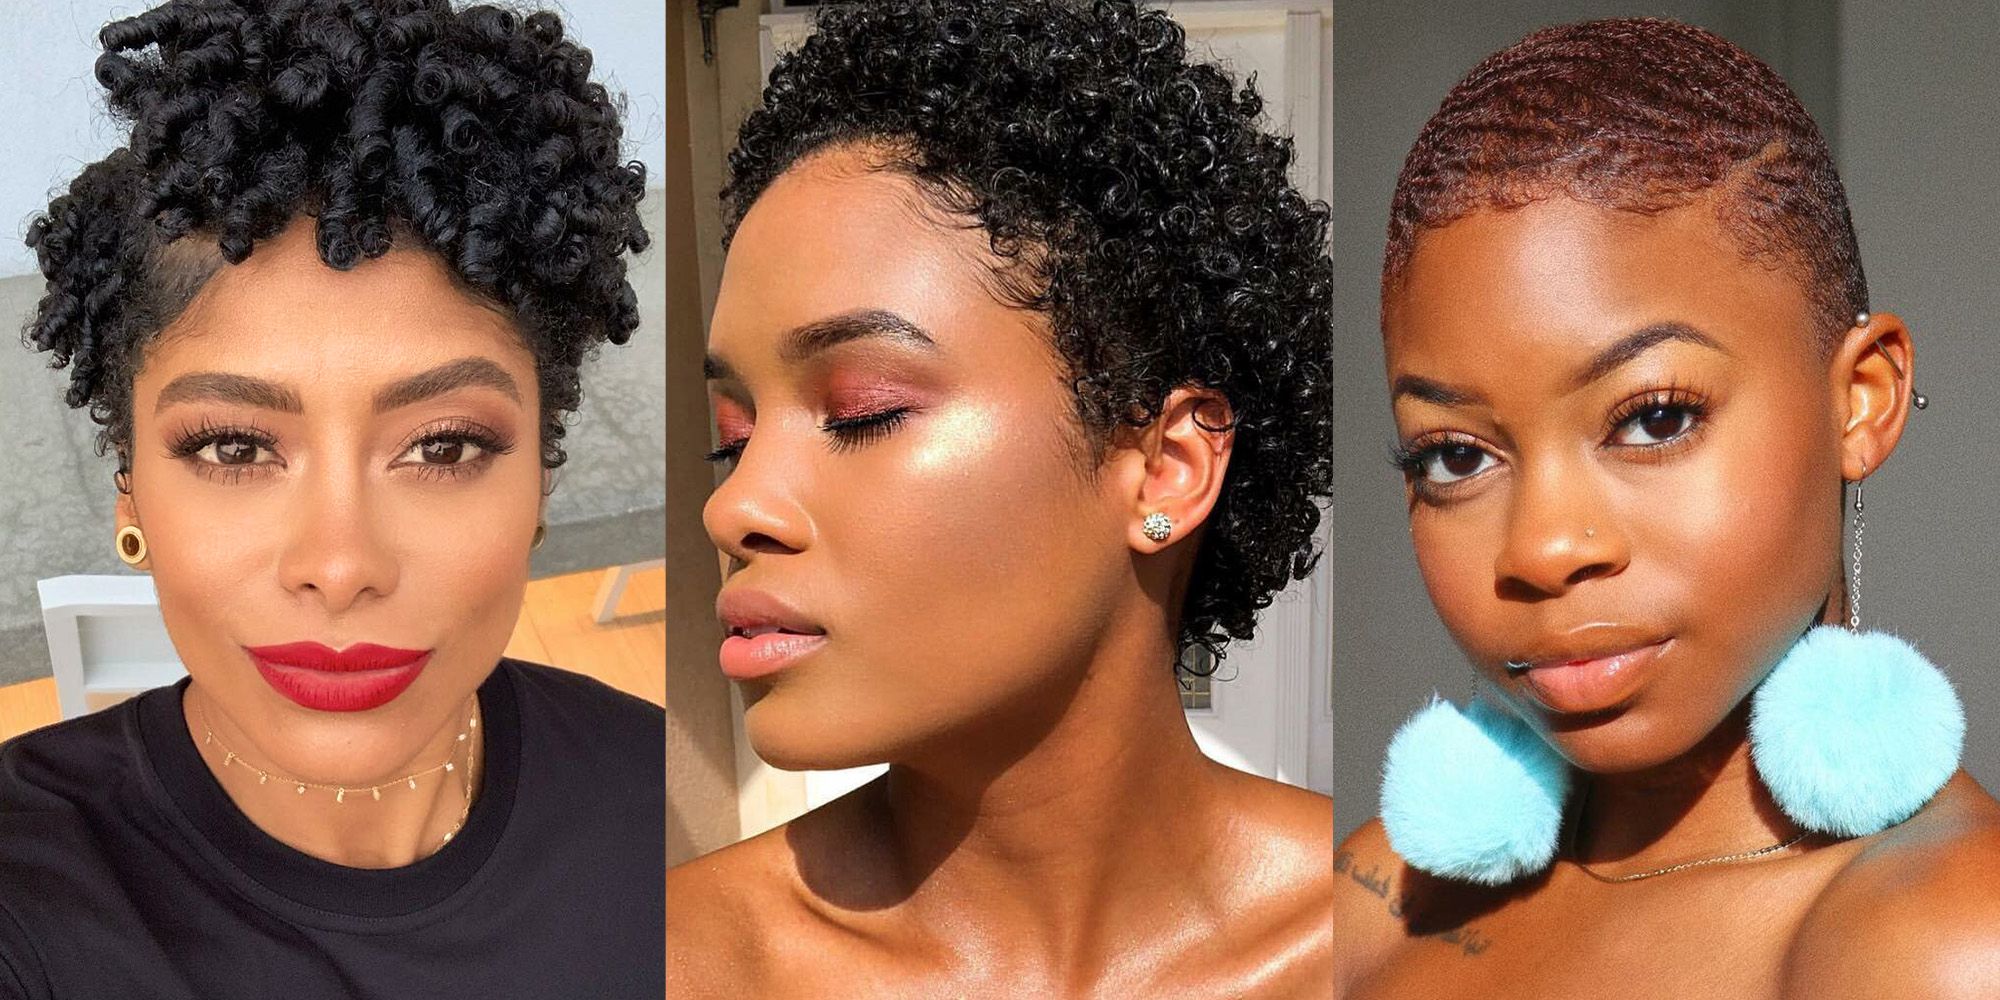 14 short natural hairstyles - the best hairstyles for short